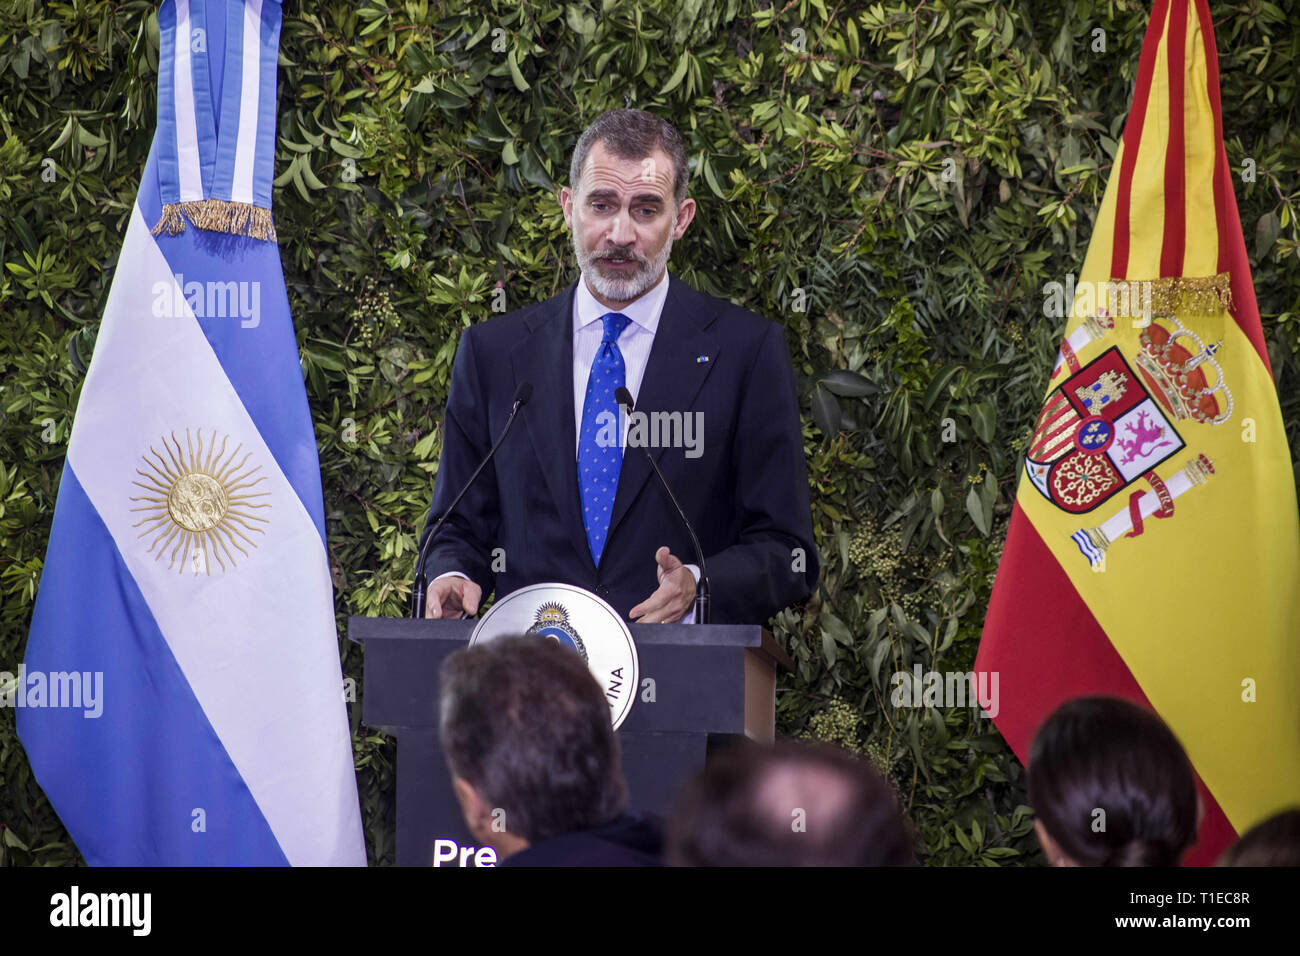 Buenos Aires, Federal Capital, Argentina. 25th Mar, 2019. The kings of Spain, Felipe VI and Letizia Ortiz, arrived on Sunday night, March 24, in Buenos Aires as part of the State visit to Argentina.According to the predicted, the official activities of the monarchs began this Monday, March 25, with a bulky agenda of activities.In the morning they met at Casa Rosada with President Mauricio Macri and the First Lady, Juliana Awada.The kings arrived at the government headquarters around 11 in the morning and after taking the official photo in the White Room, Macri and Felipe VI gave a message Stock Photo